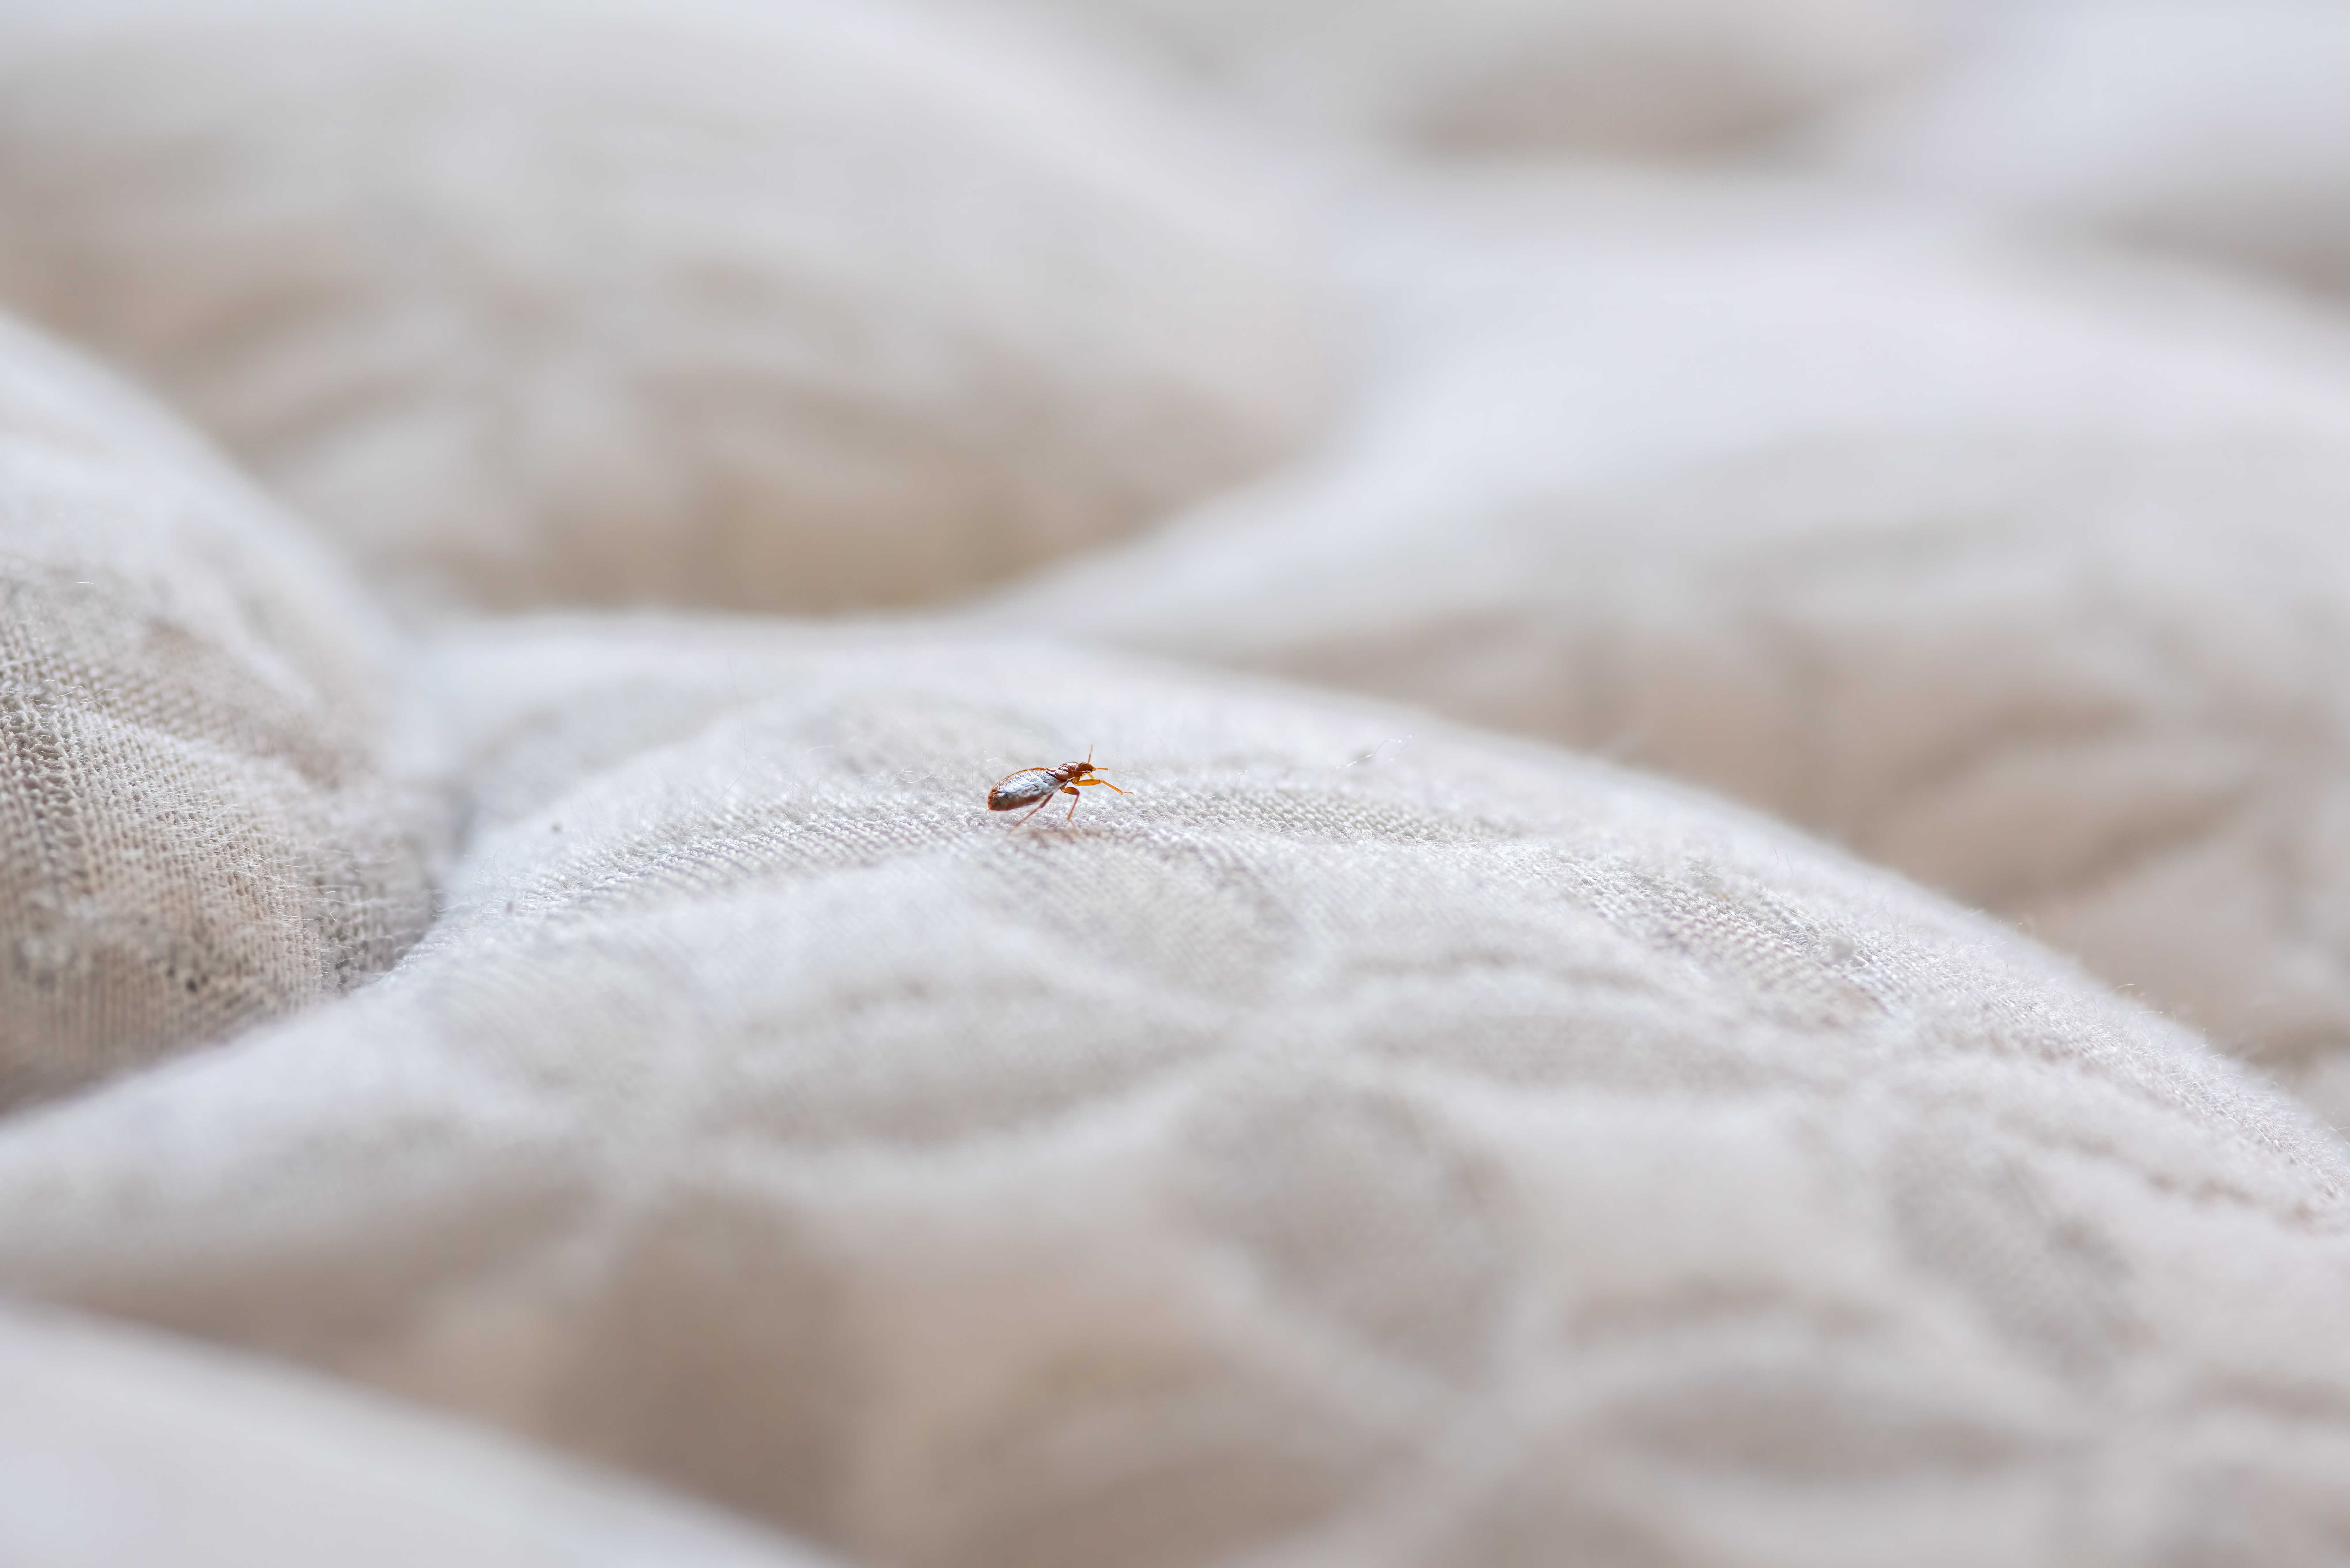 A bed bug on a bed - GGA Pest Management provides bed bug control in Waco, TX.